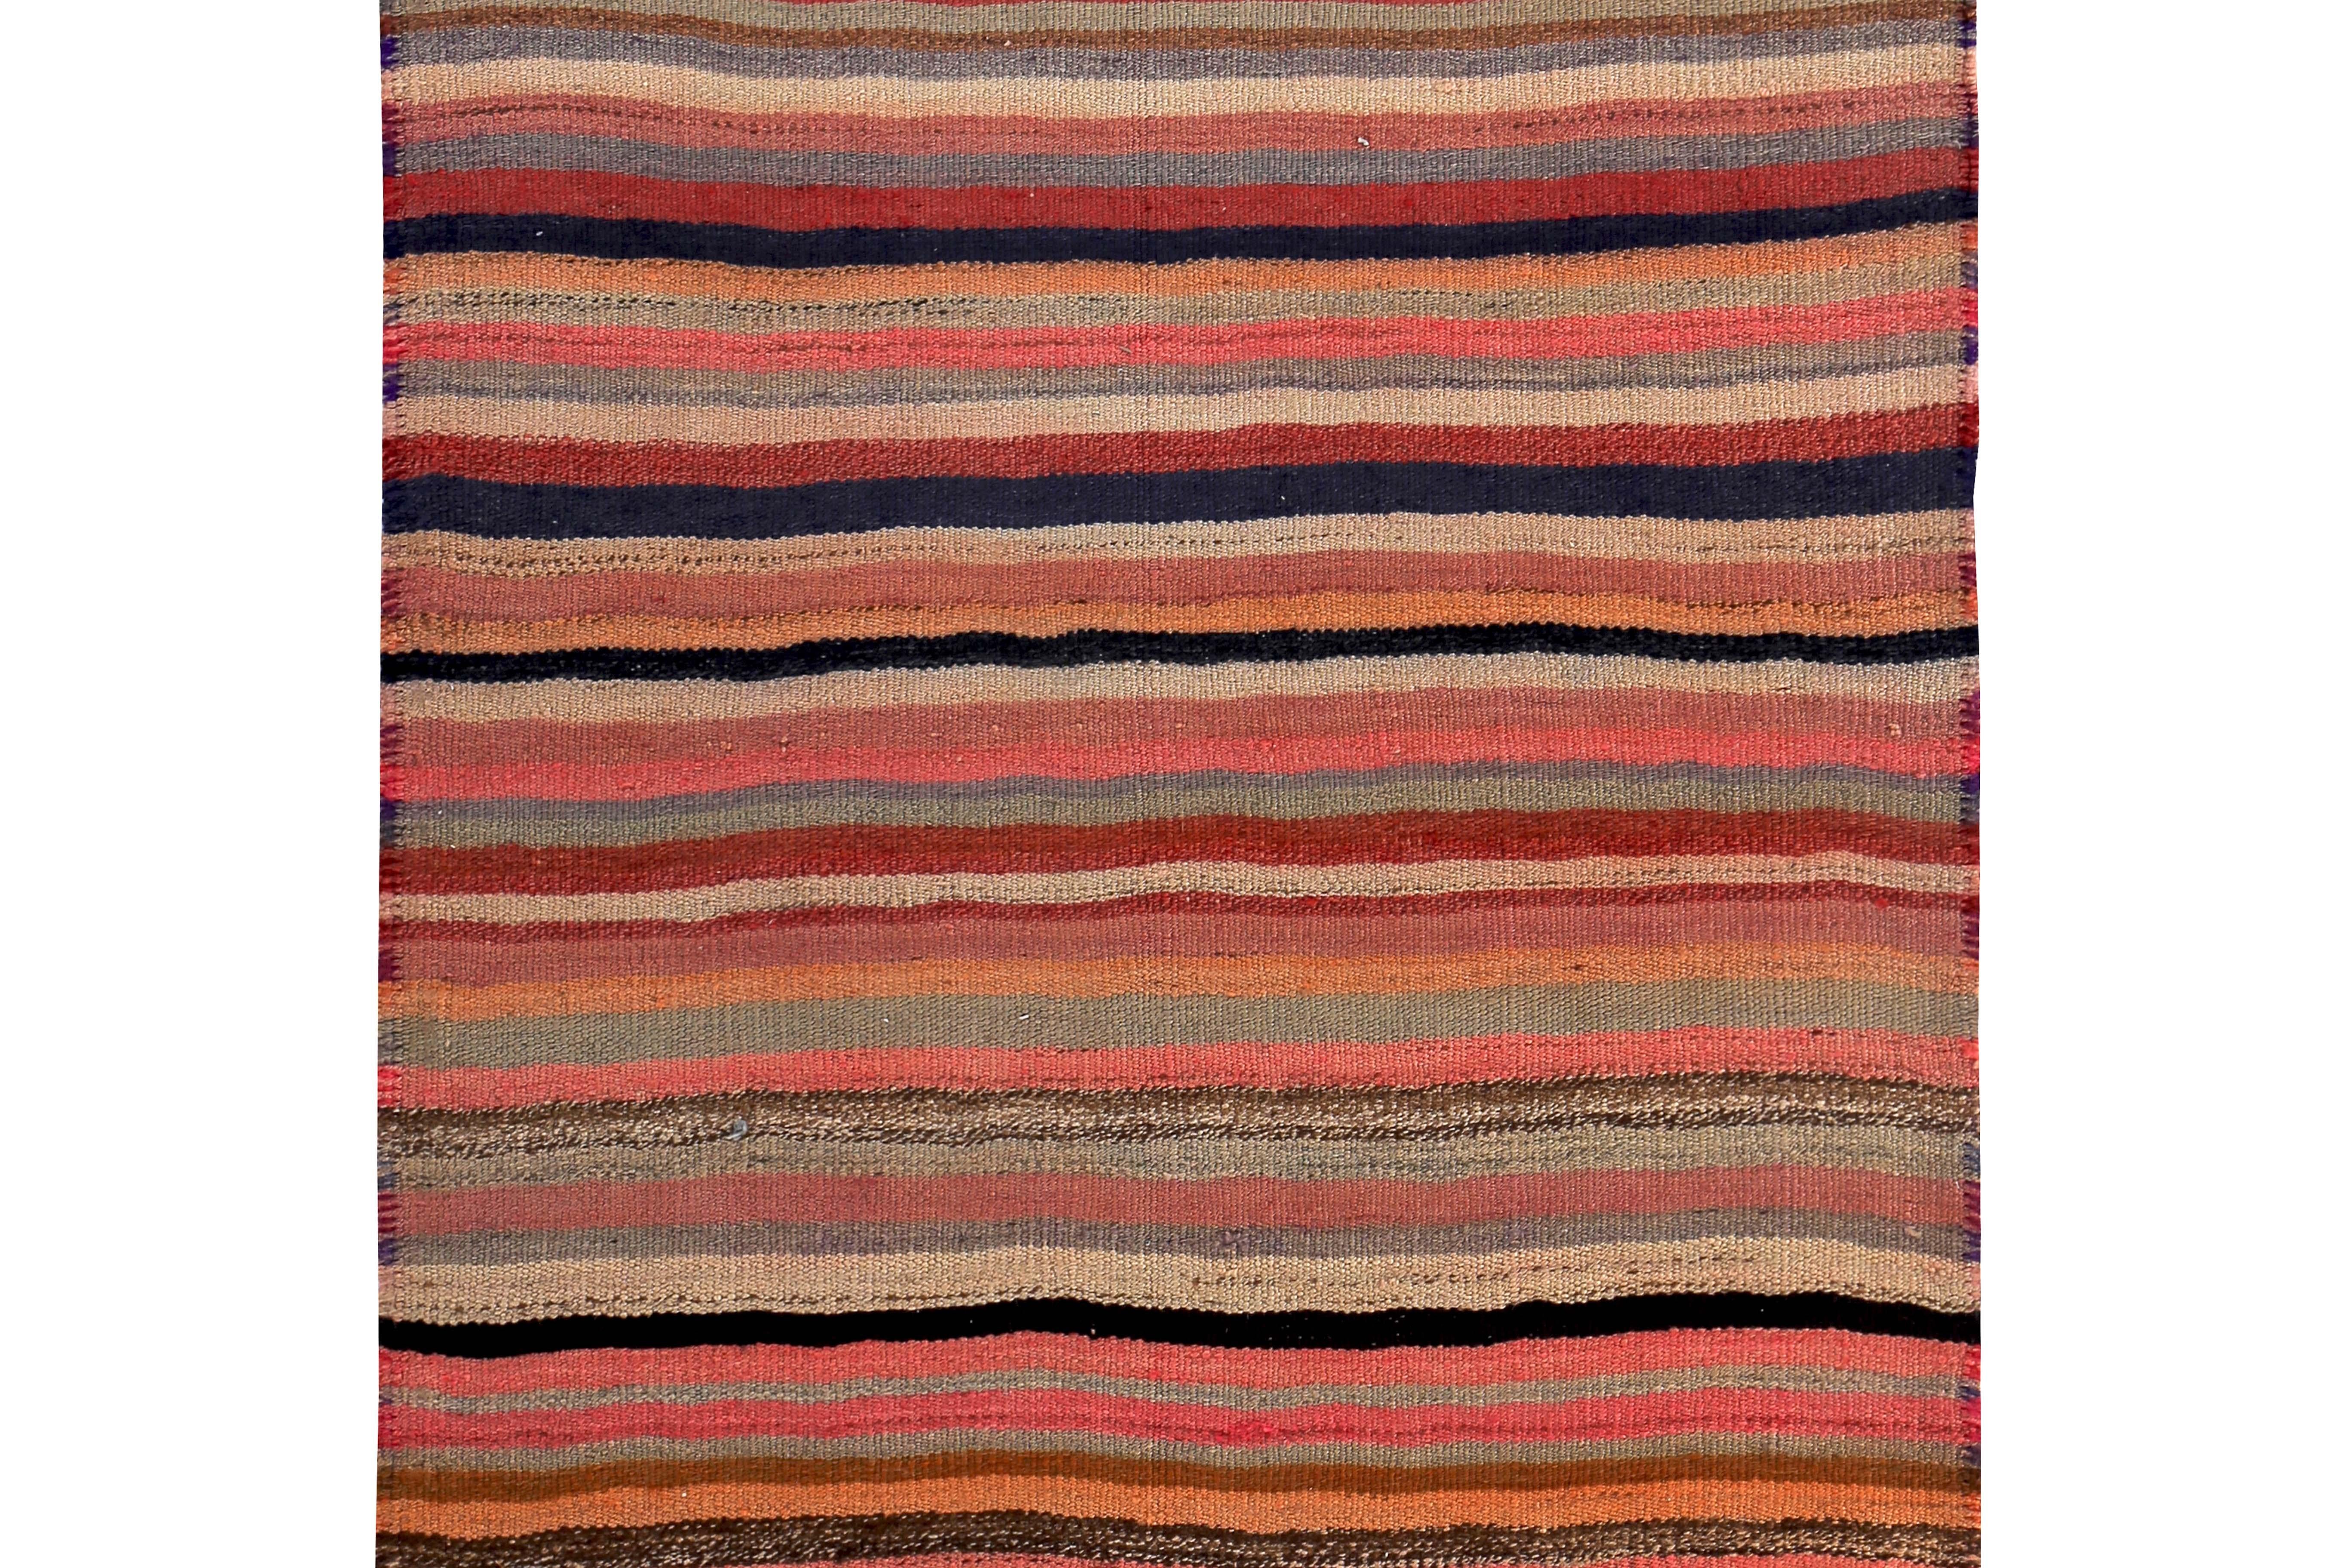 Hand-Woven Turkish Kilim Runner Rug with Red, Orange and Pink Stripes Pattern For Sale